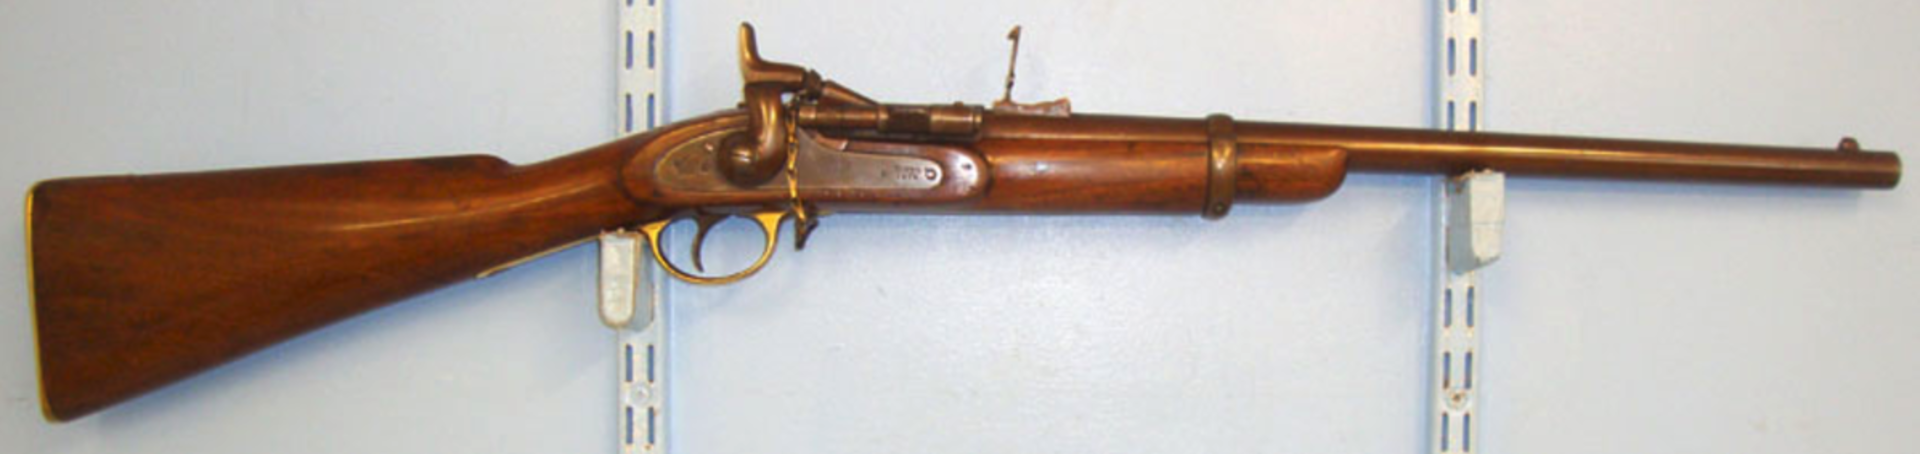 OFFICER’S QUALITY, 1874 Enfield Tower Snider .577 Calibre Cavalry Carbine By V&R Blakemore - Image 2 of 3